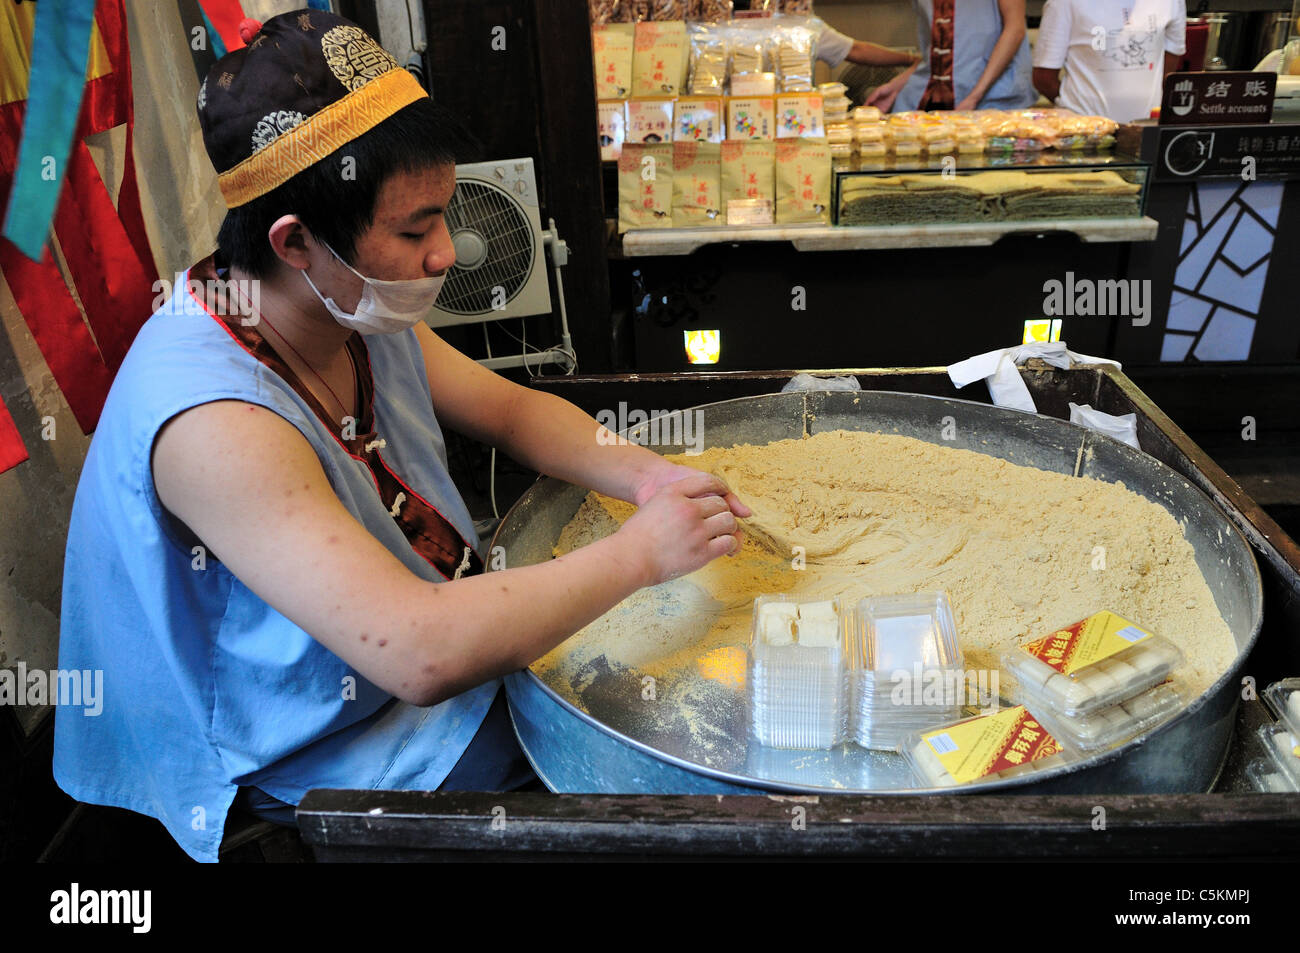 A young man making candy in front of a shop. Chengdu, Sichuan, China. Stock Photo